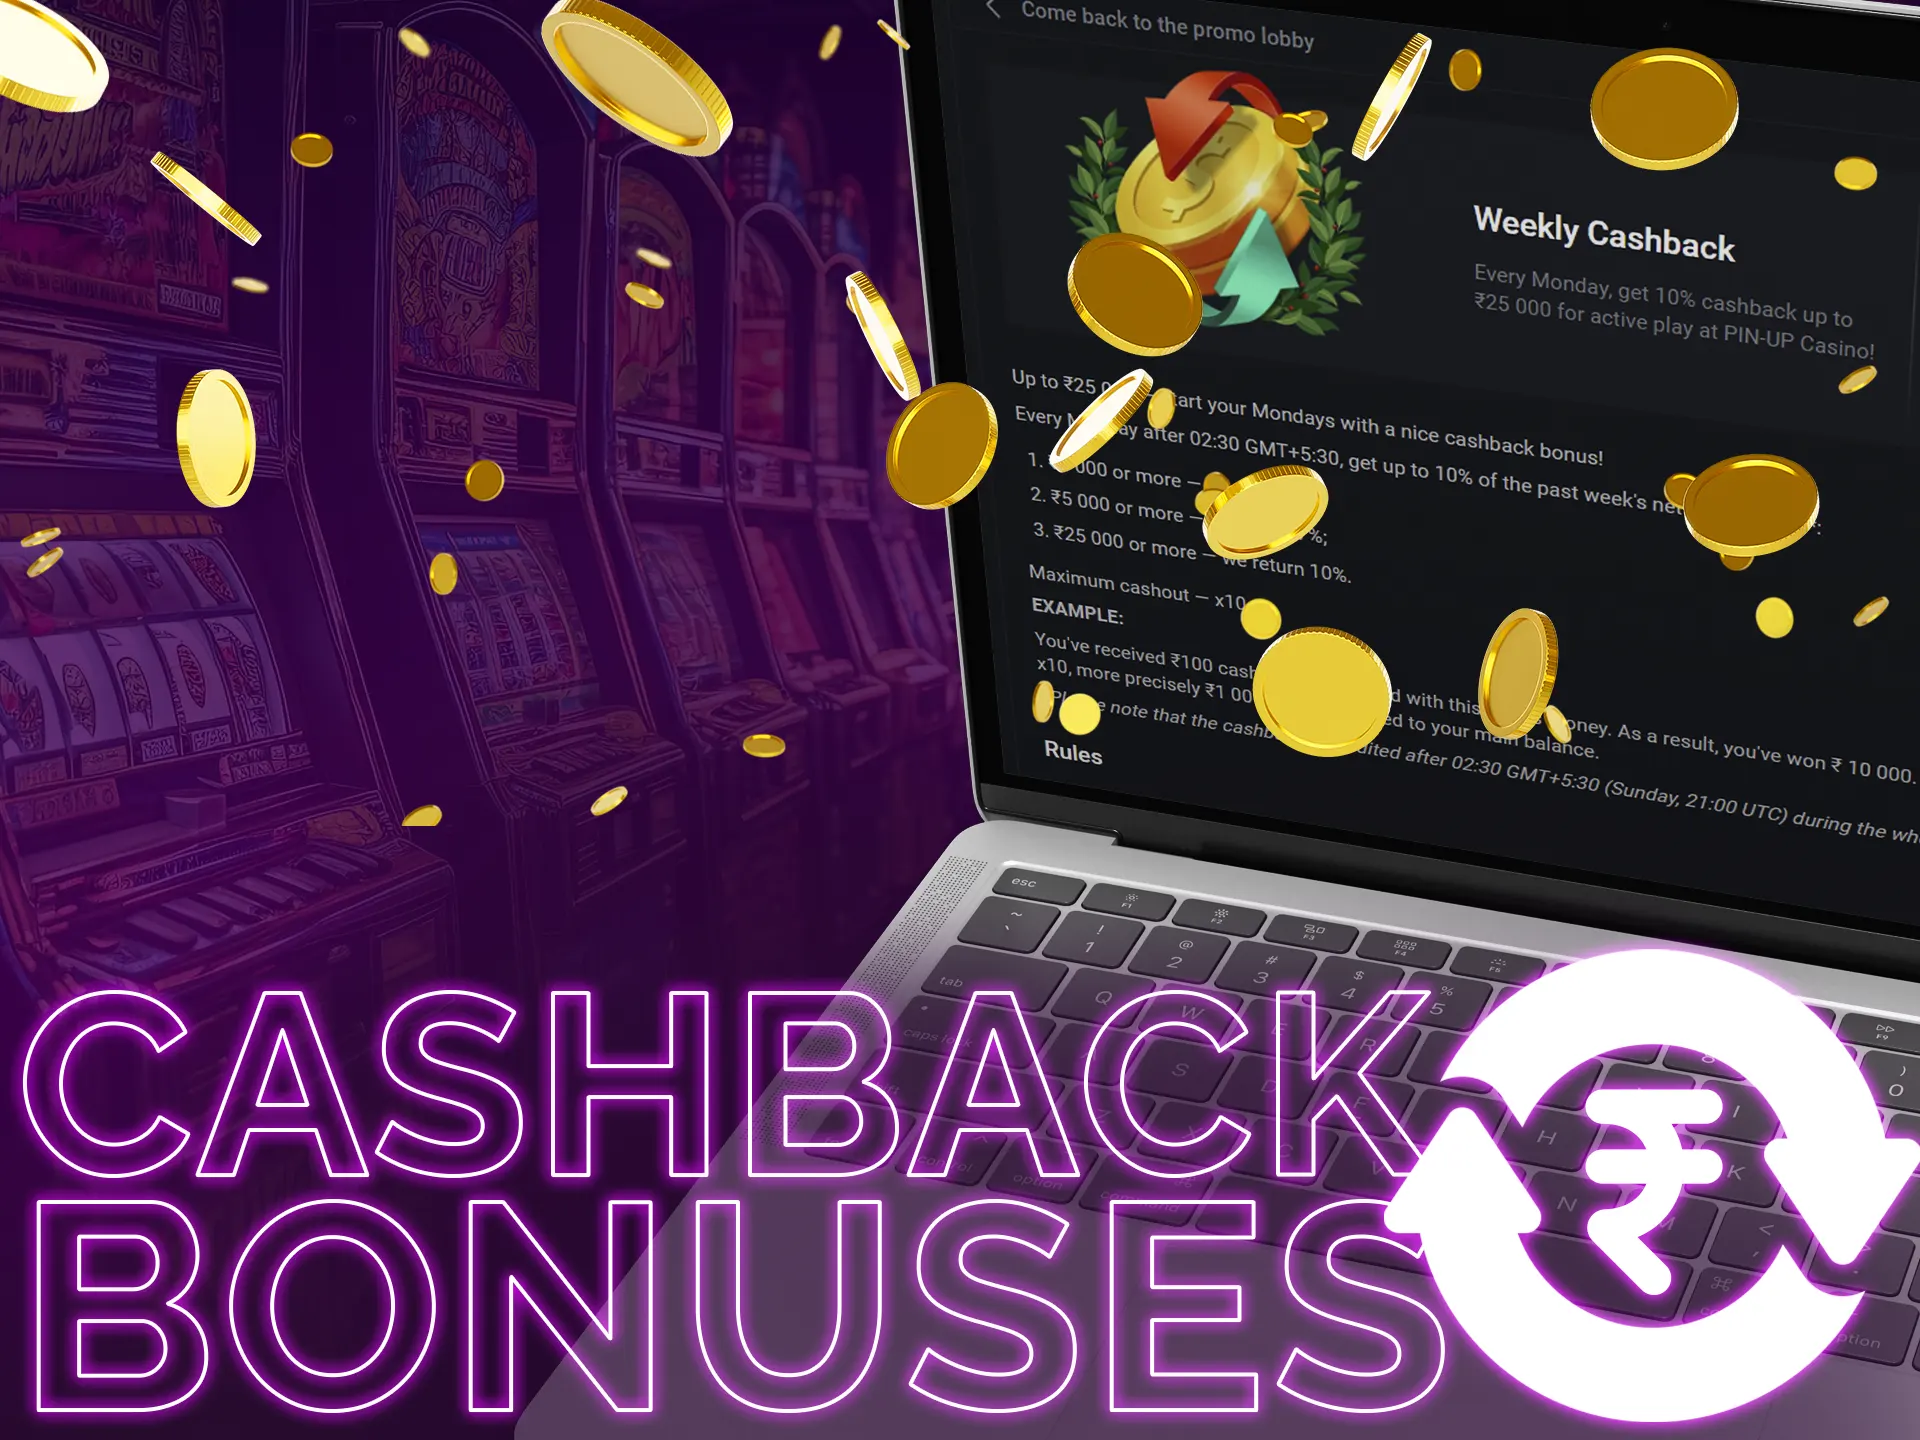 Cashback bonuses refund a portion of losses, providing a safety net for players, especially for high rollers.